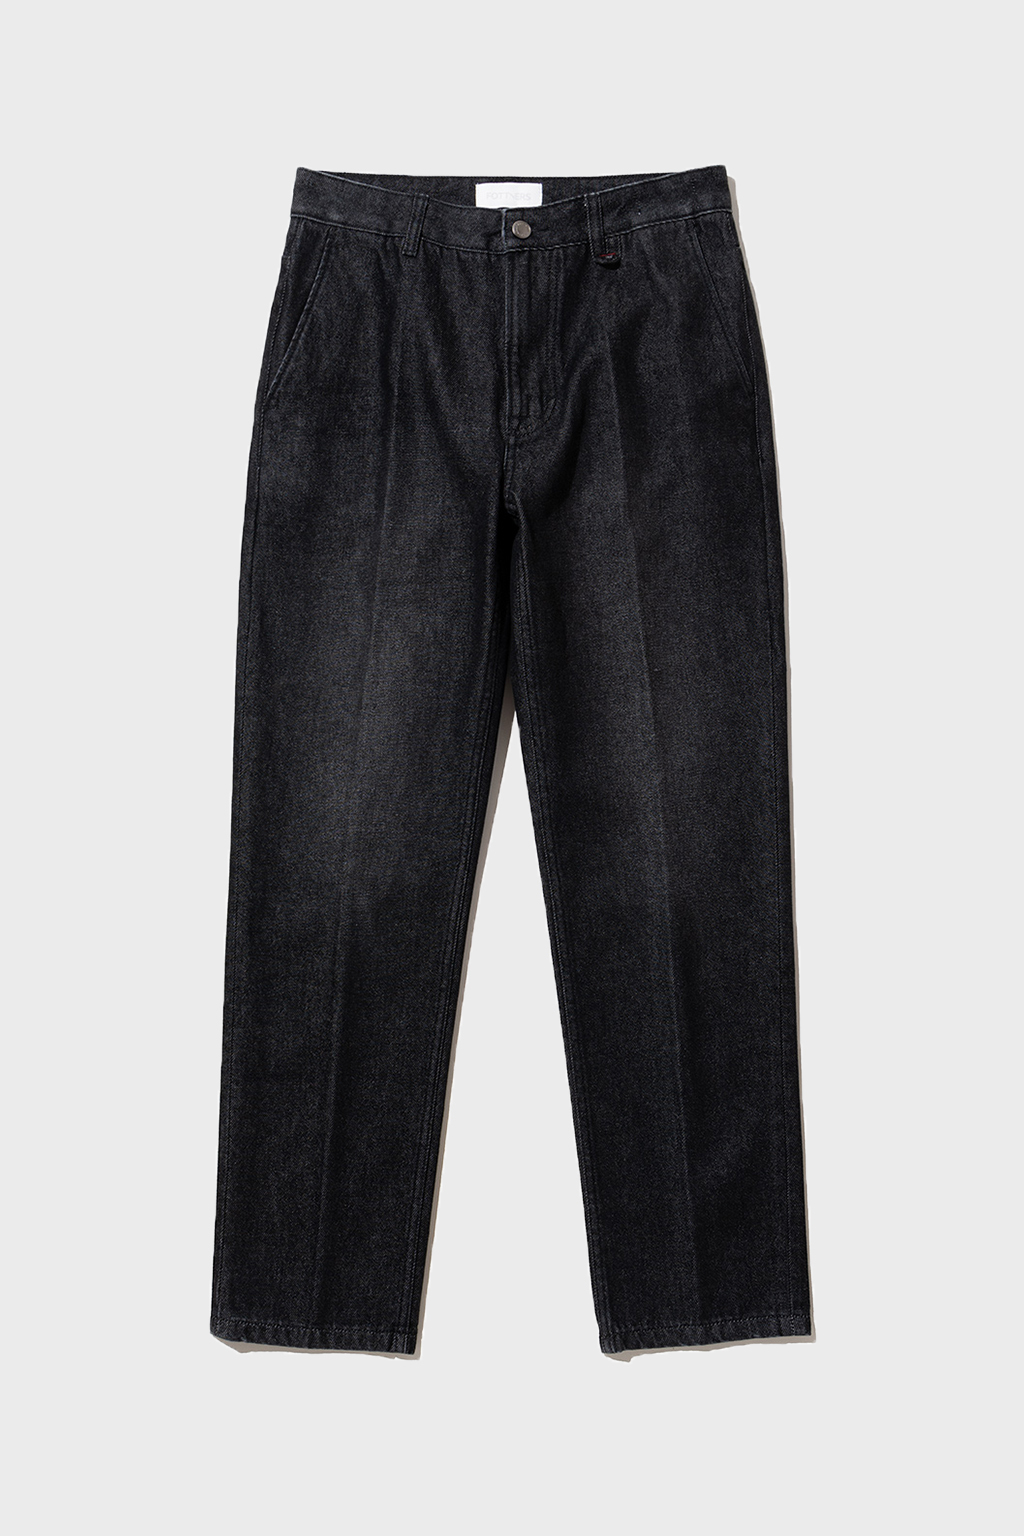 Tailored Tapered Black Jeans